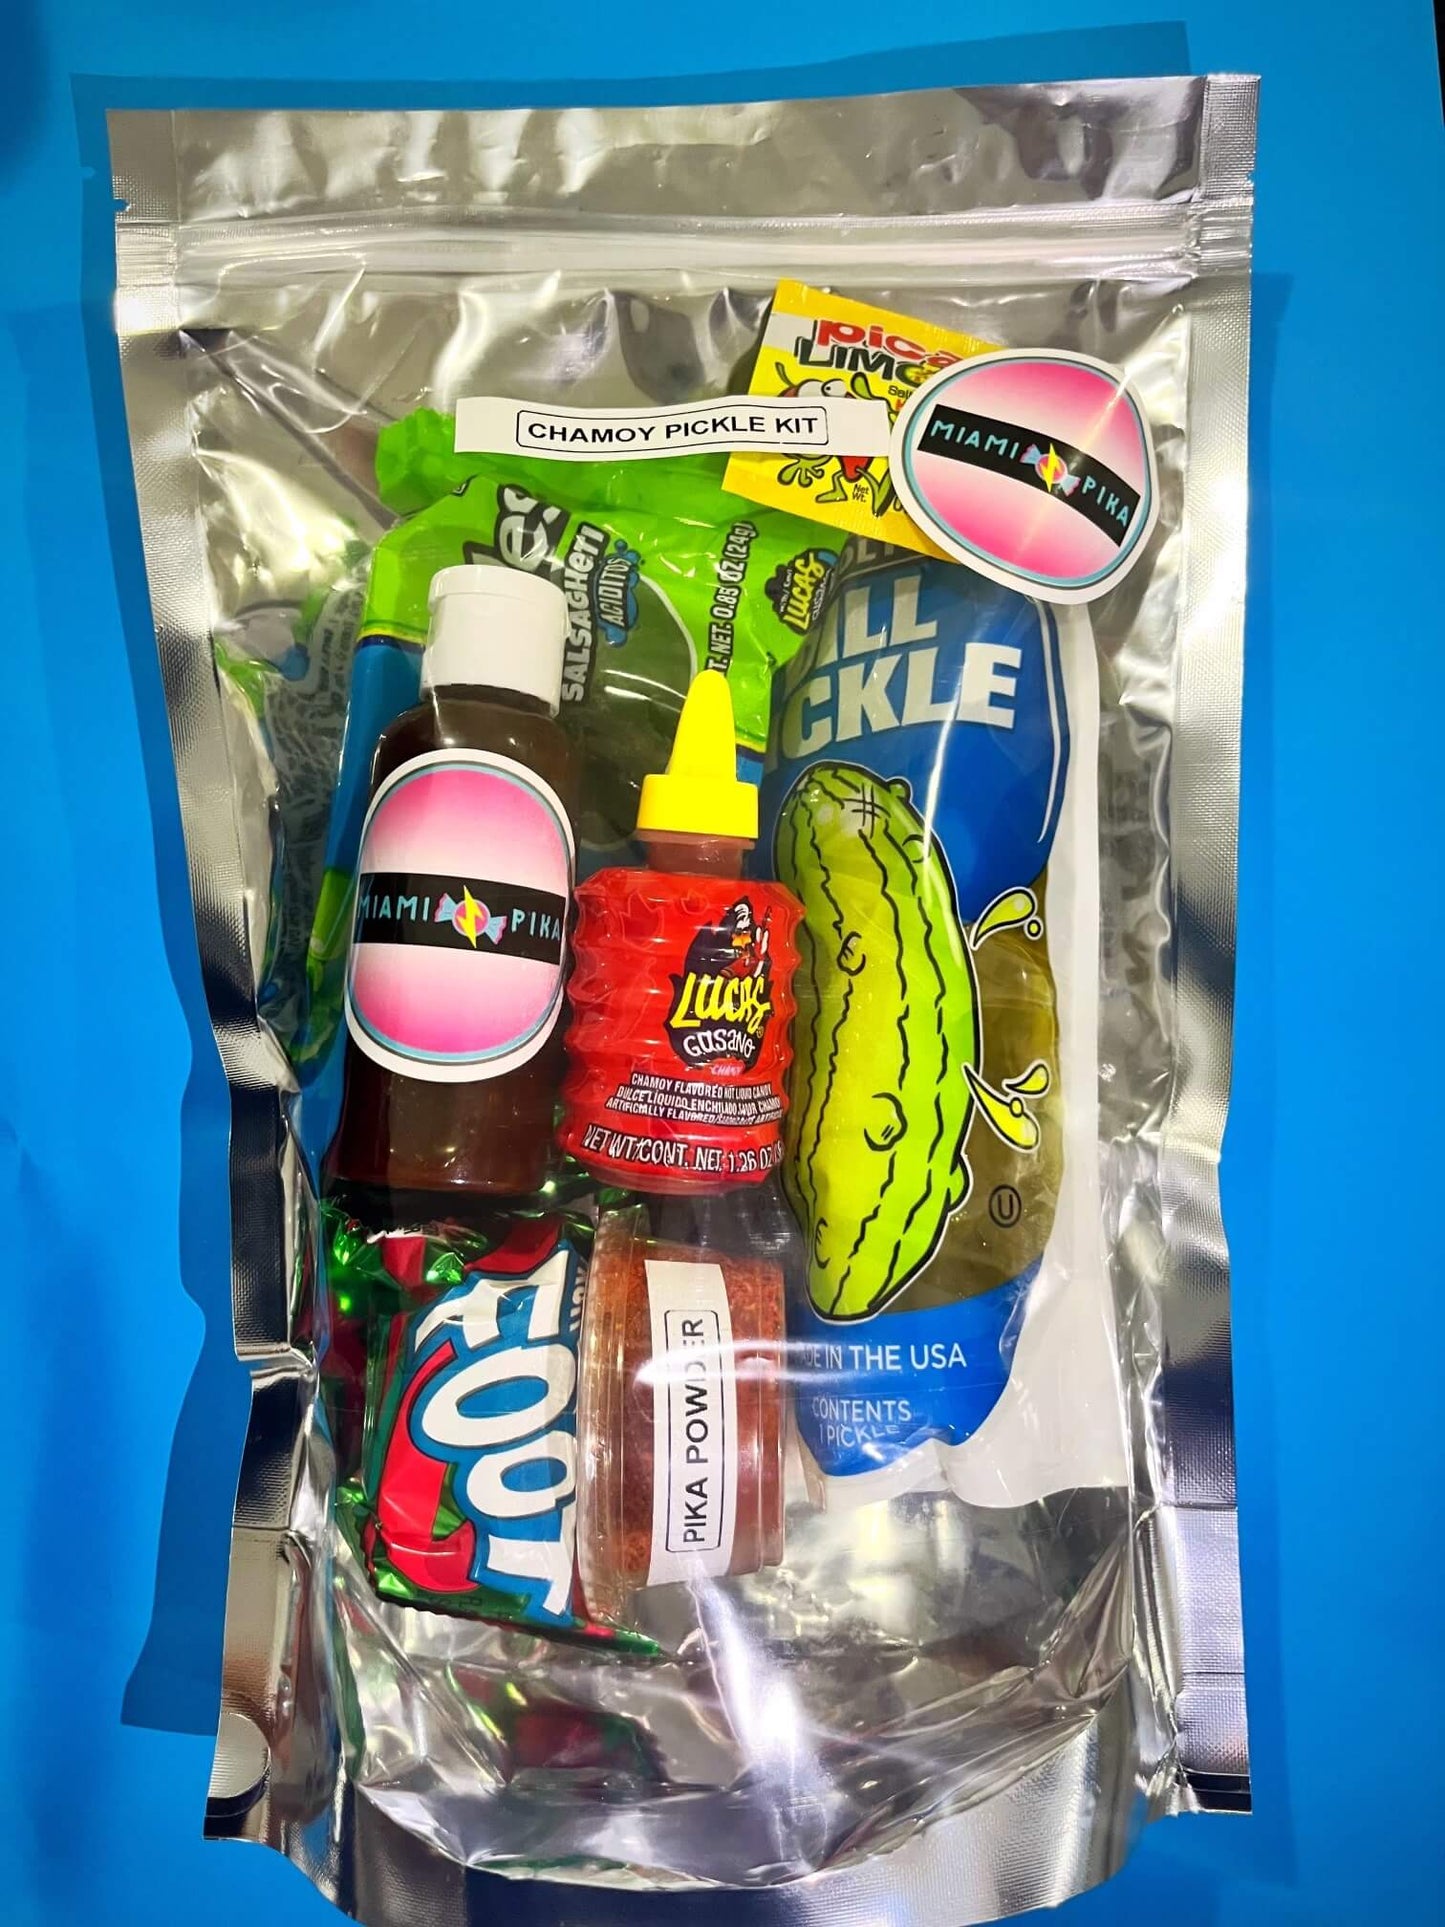 Original Chamoy Pickle Kit- Miami Pika- picapica- viral tiktok- tiktok pickle kit- chamoy pickle kit- pickle- chamoy rim dip- chamoy sauce- chamoy candy- tiktok pickle-viral pickle kit-dulces enchilados- mexican candy